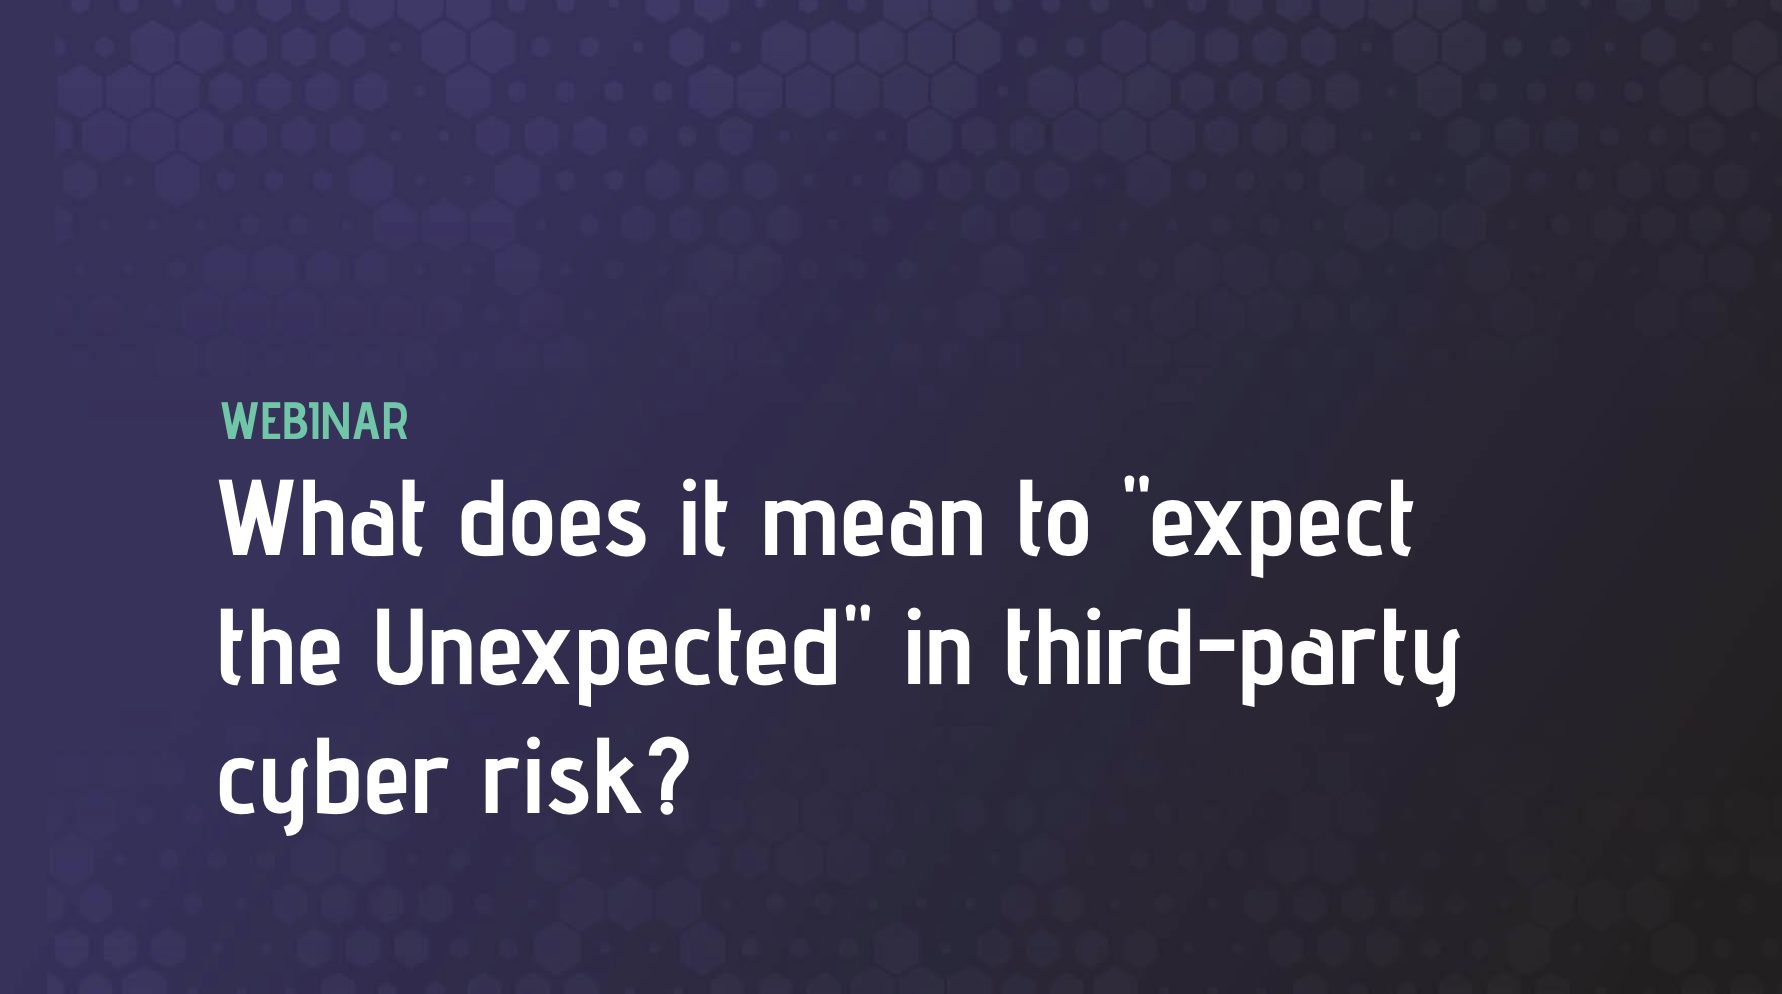 What does it mean to "expect the Unexpected" in third-party cyber risk?